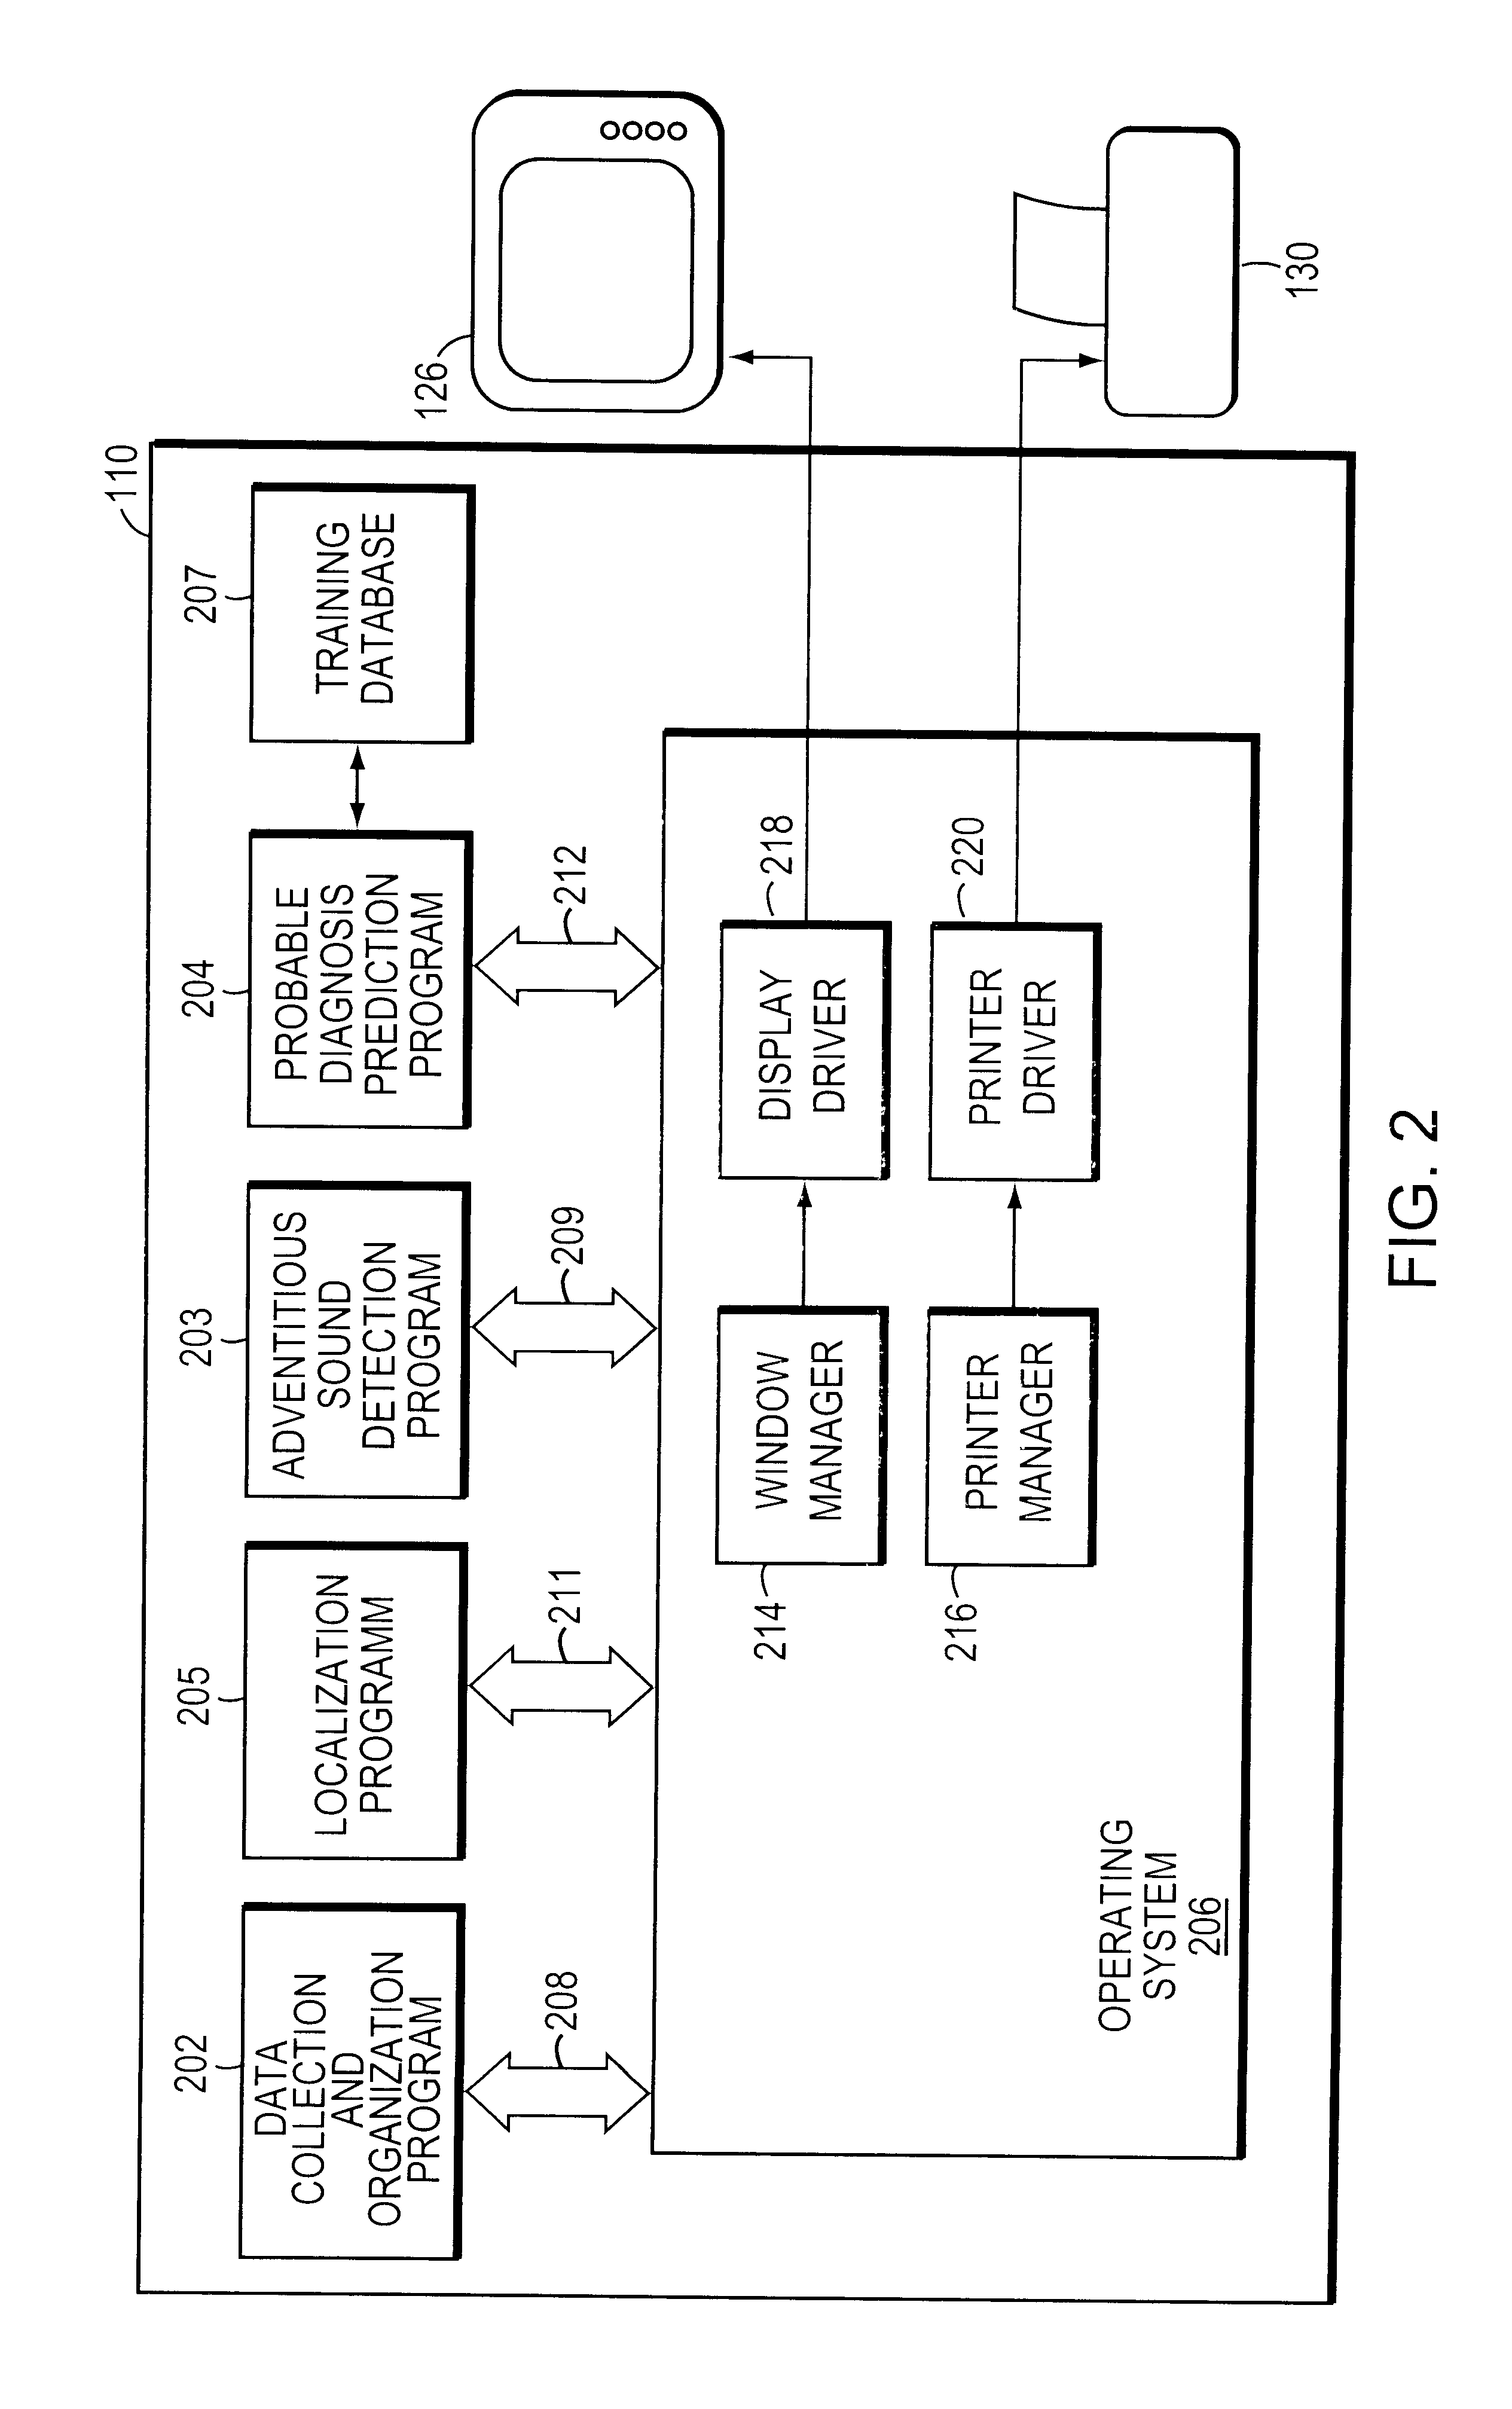 Method and apparatus for displaying body sounds and performing diagnosis based on body sound analysis